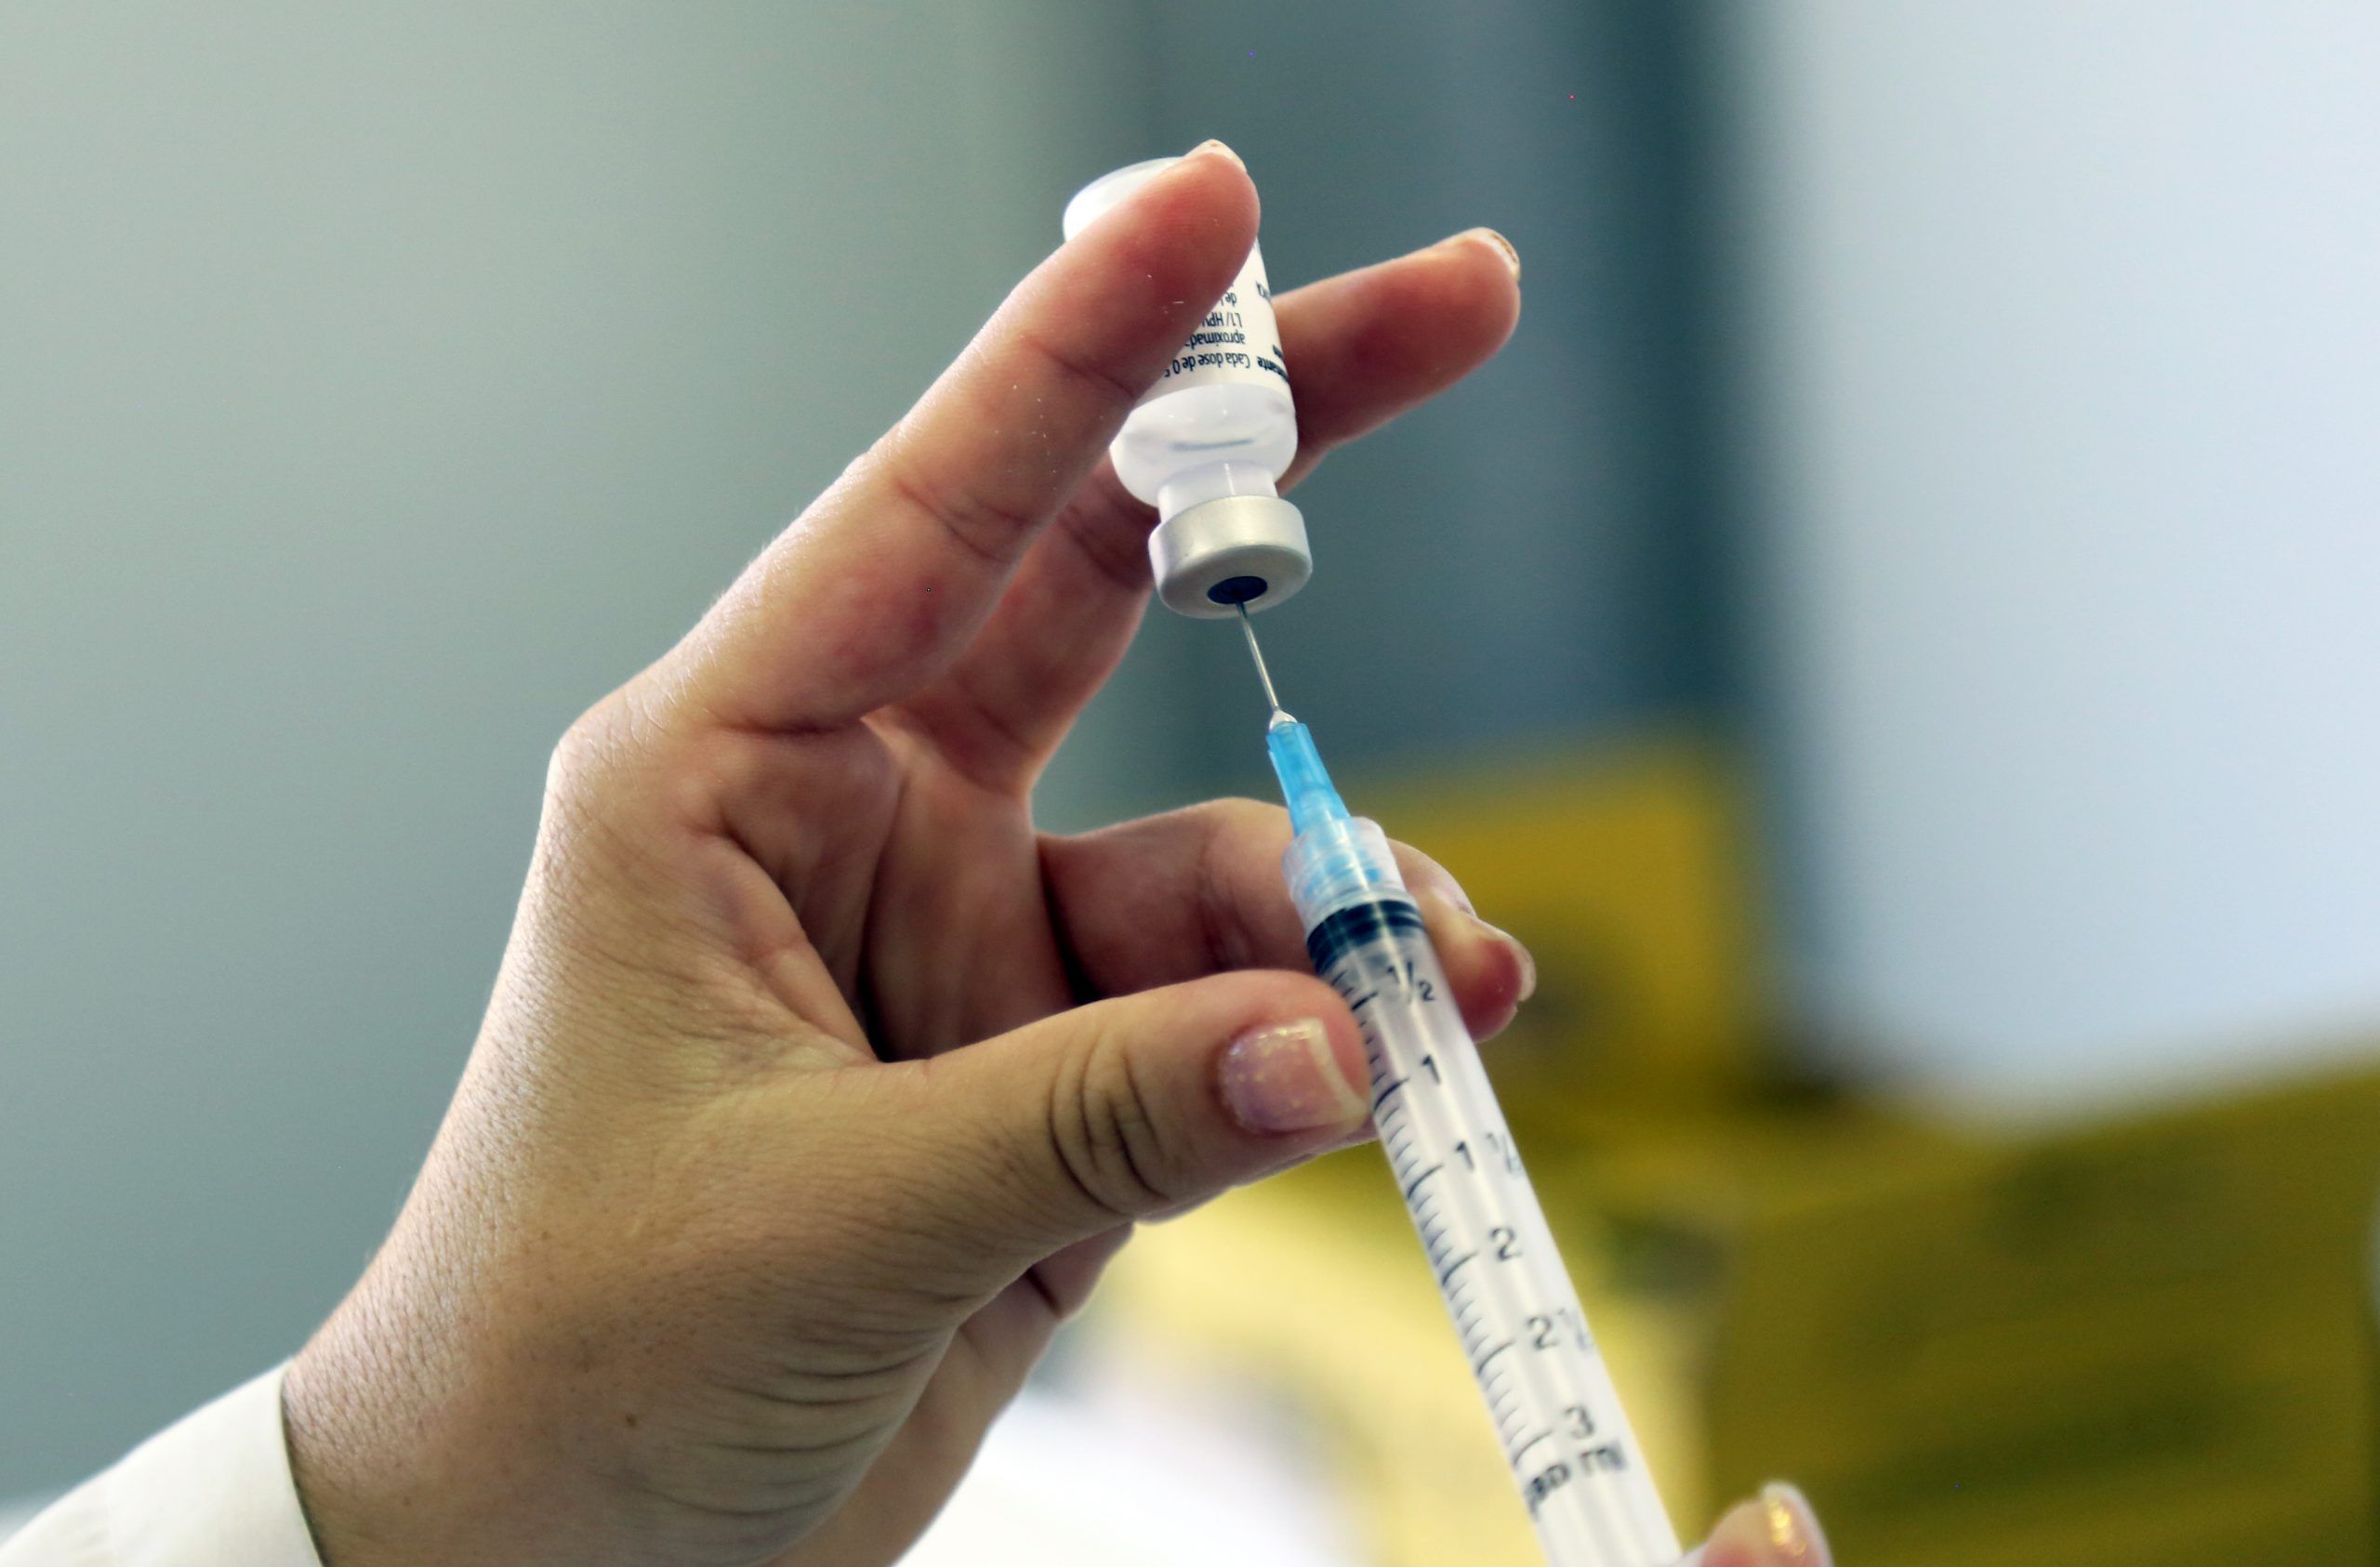 Science Round-up: First in-human trial of Danish corona vaccine returns promising results